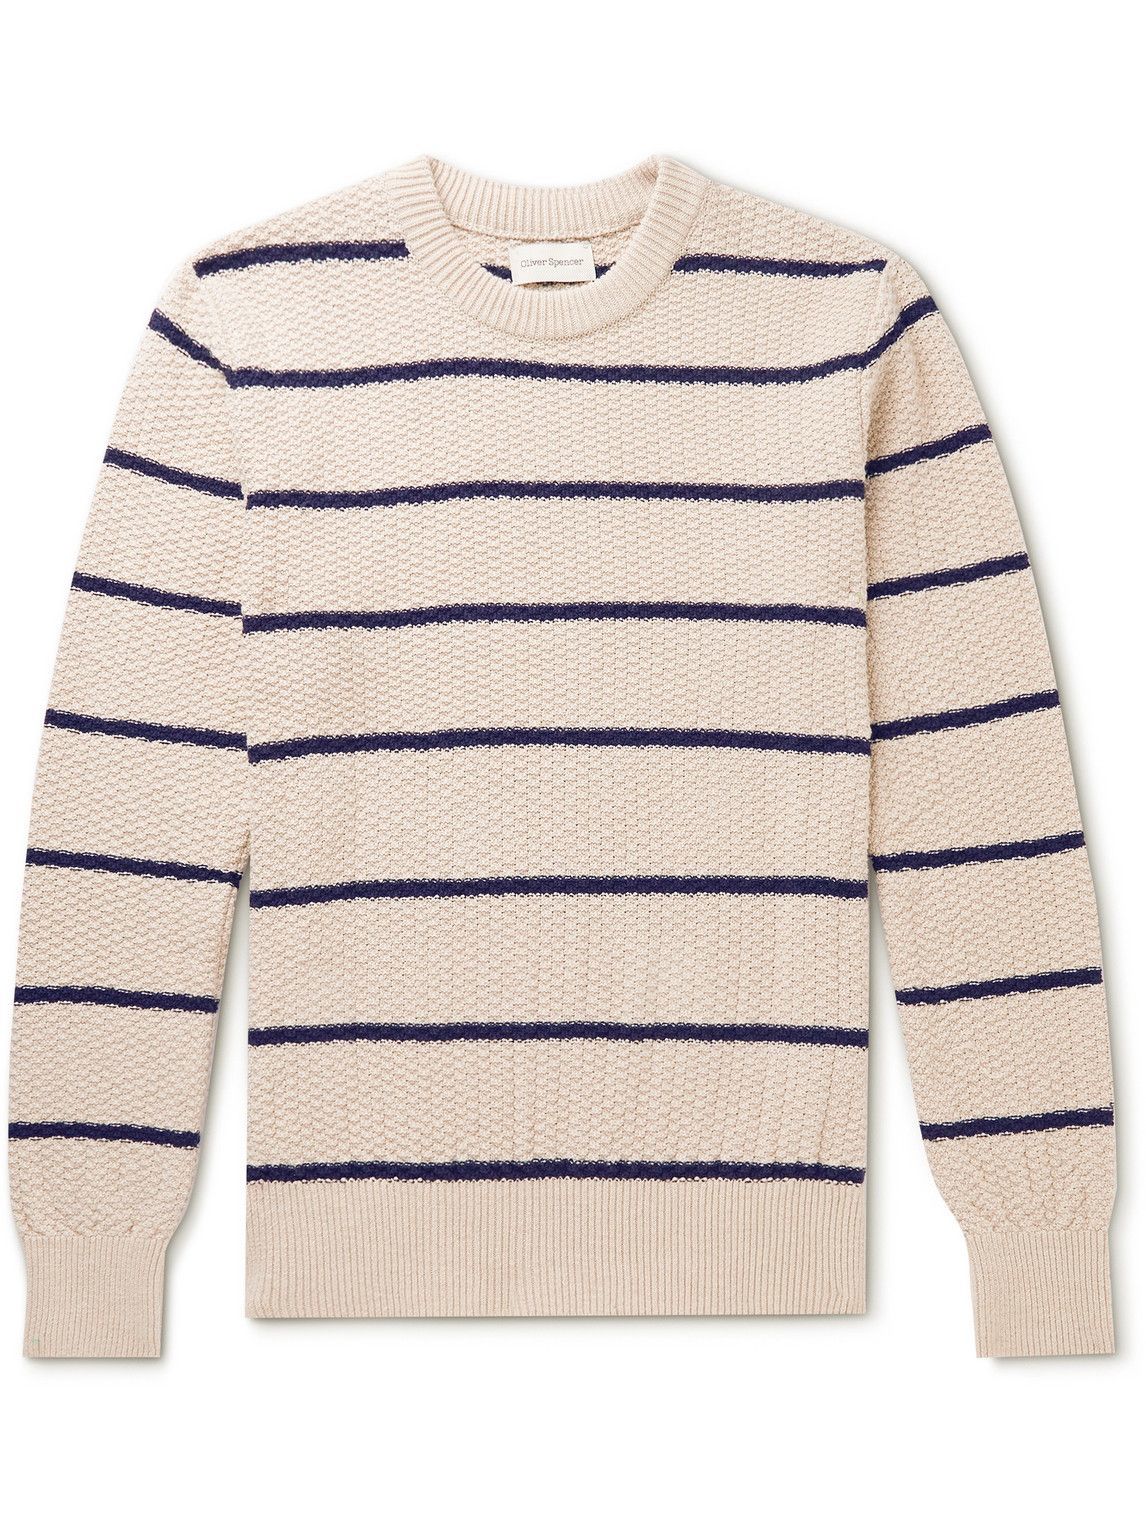 Photo: Oliver Spencer - Blenheim Striped Waffle-Knit Organic Cotton Sweater - Neutrals